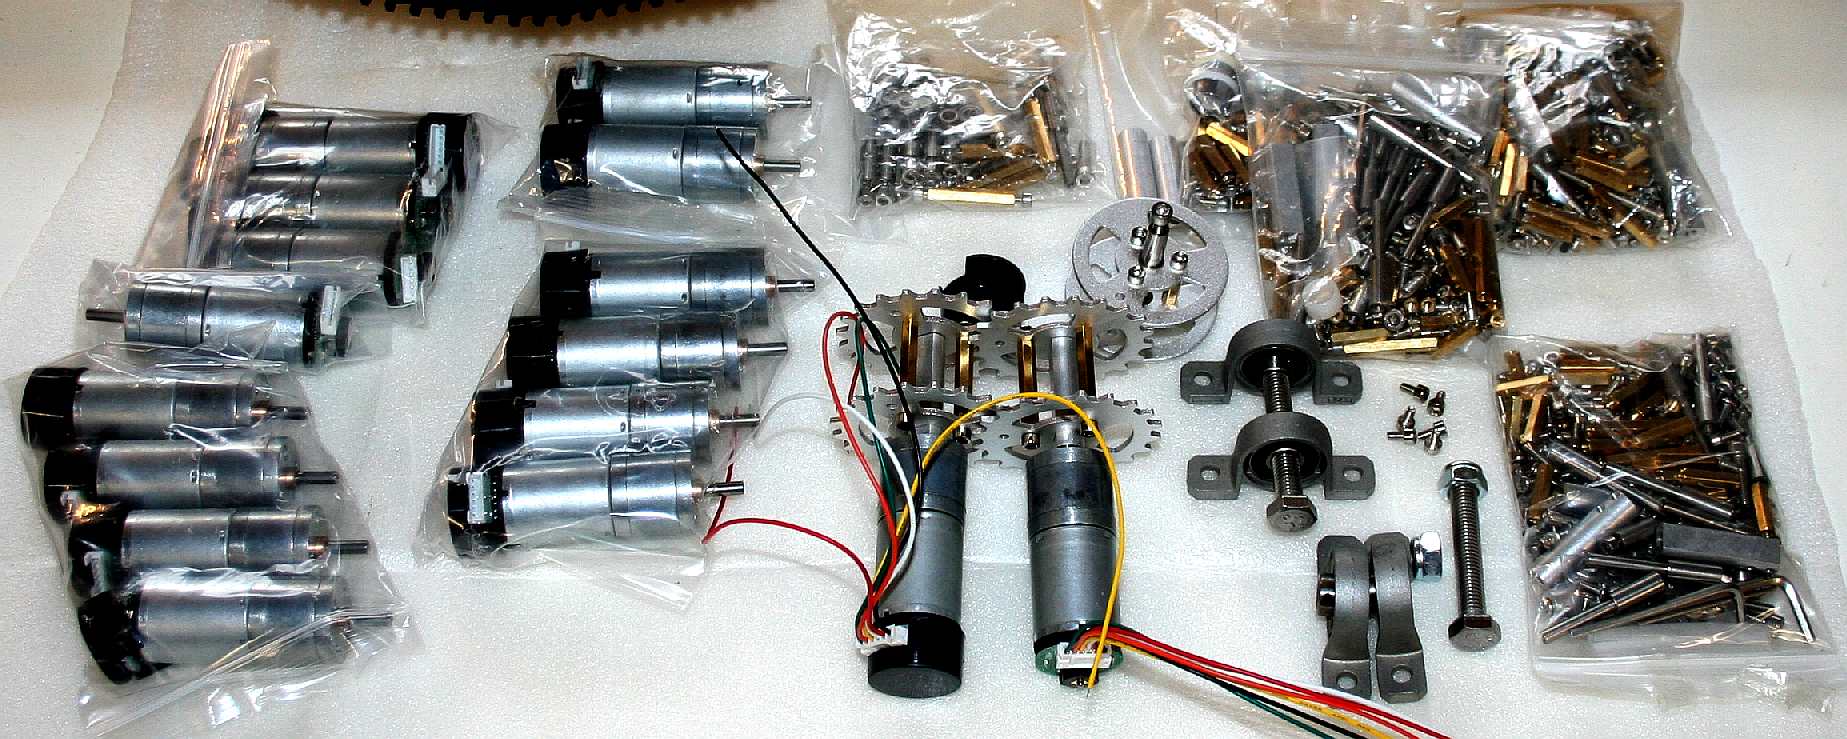 Robotic parts before assembly